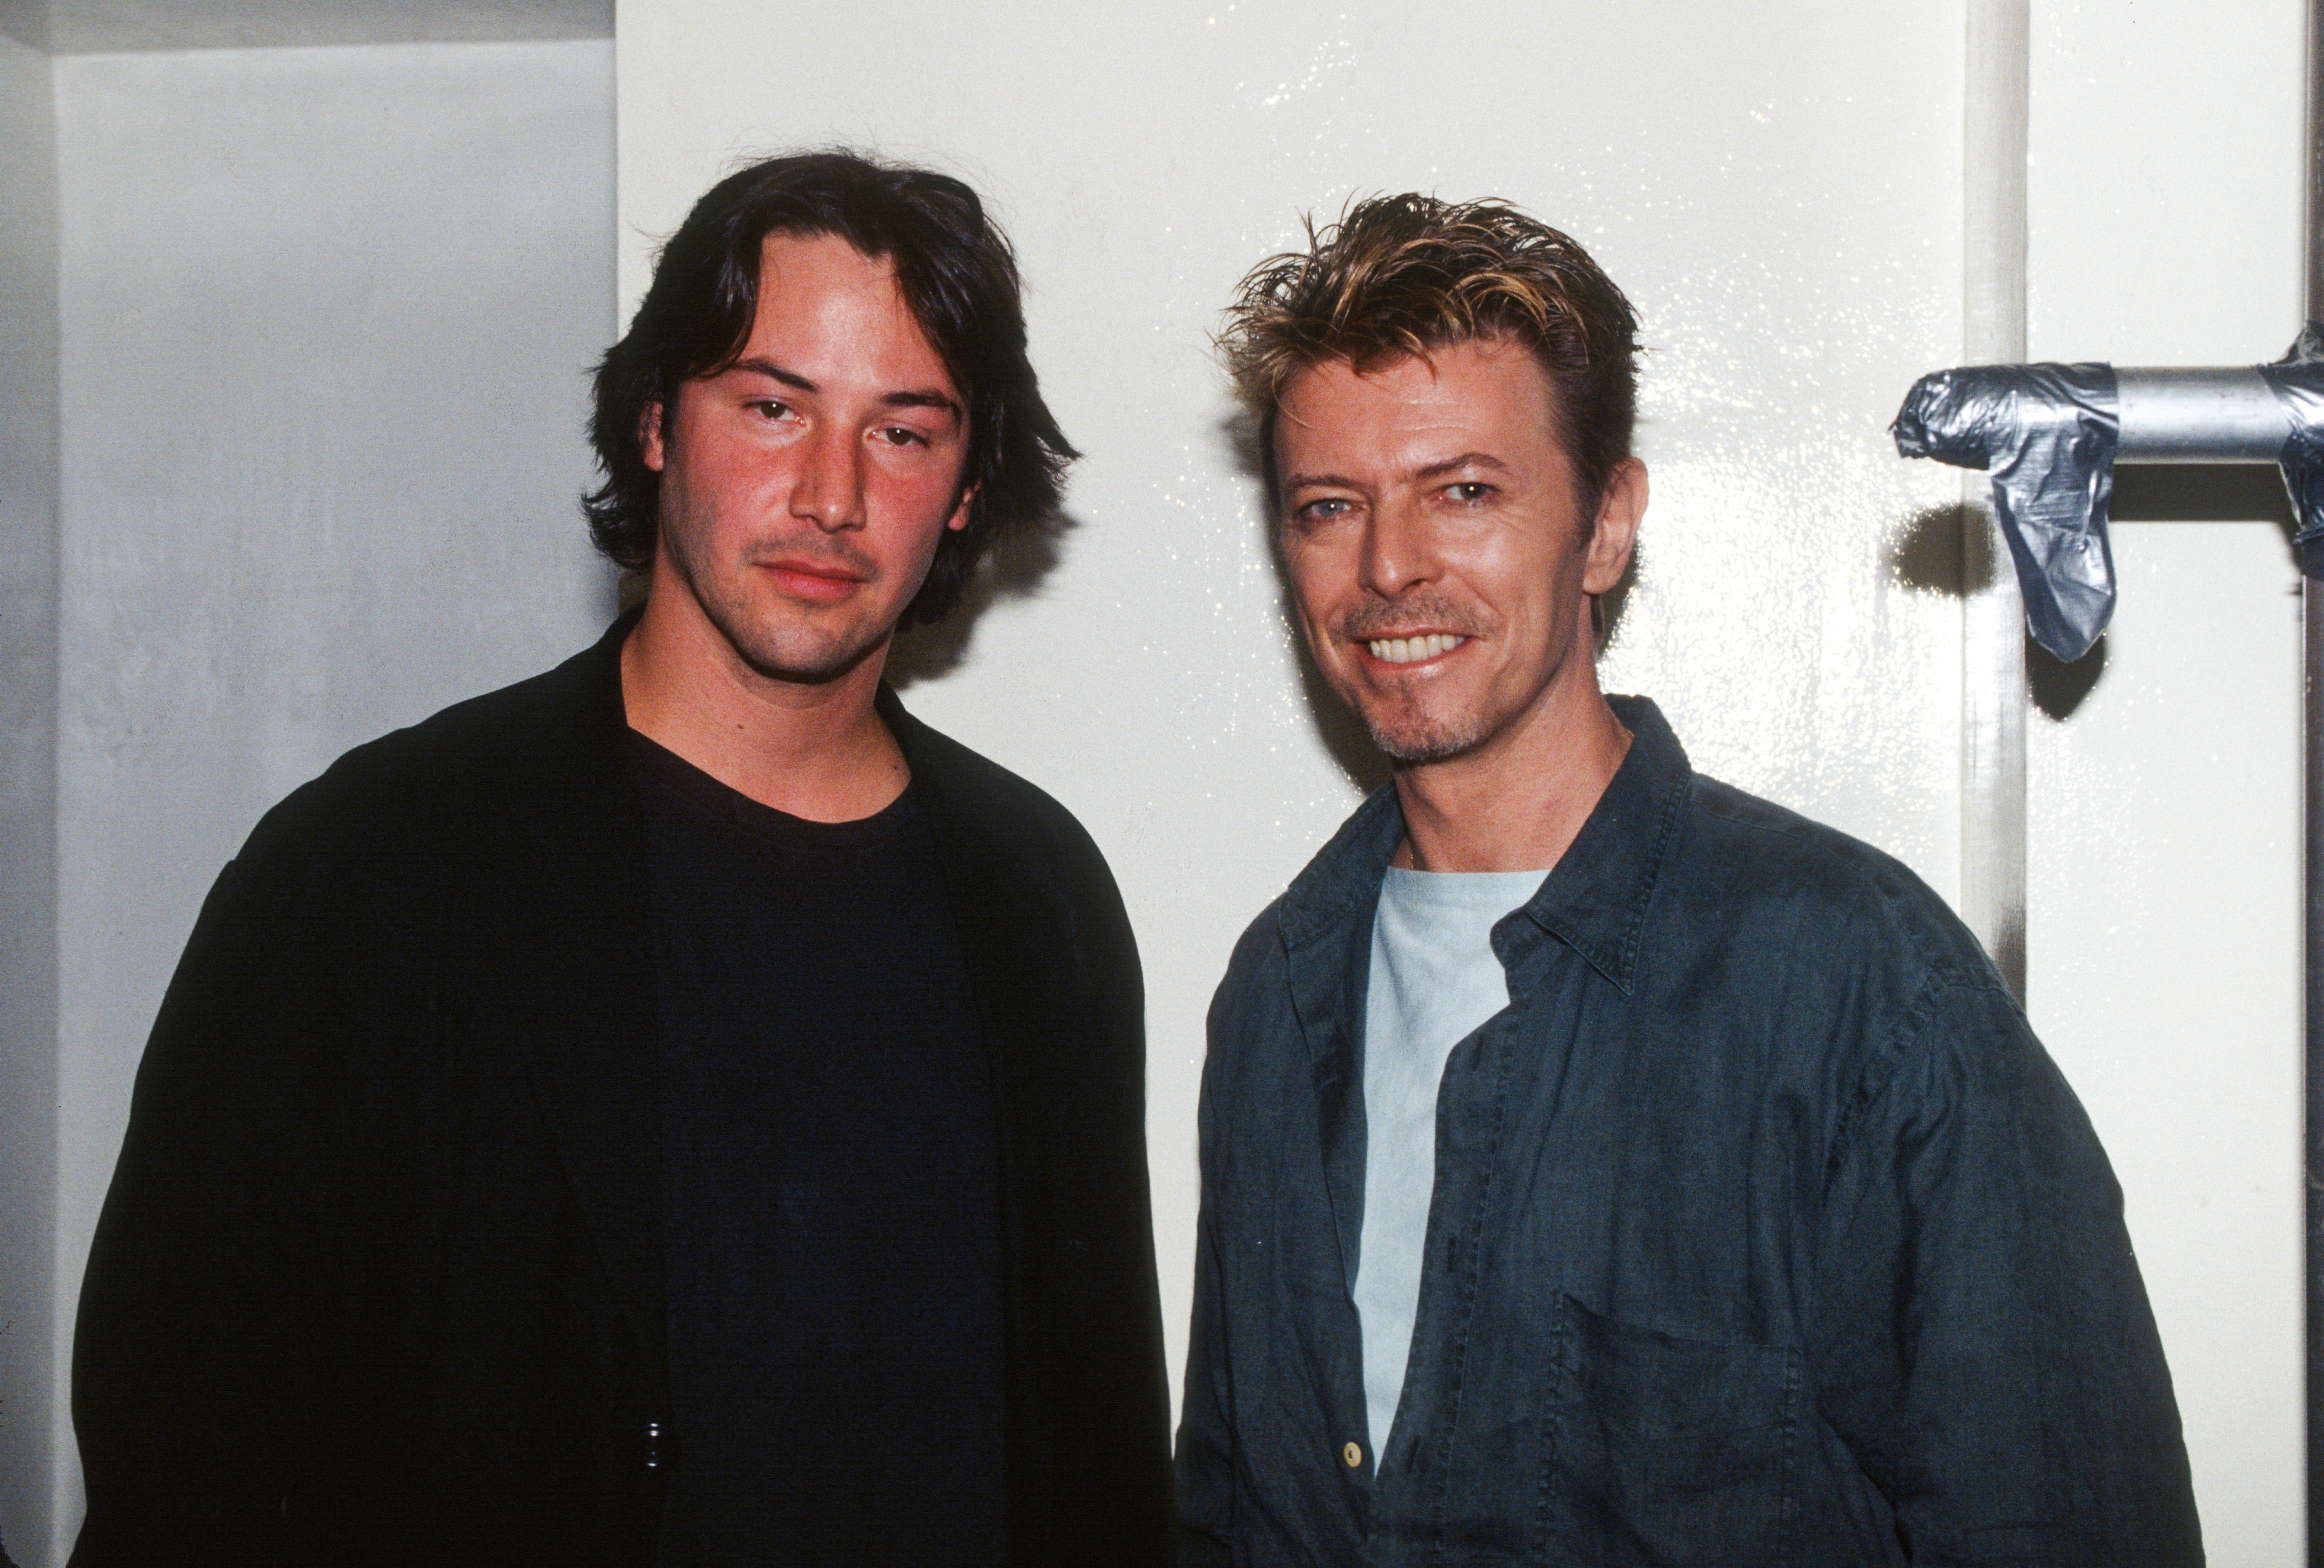 David Bowie and Keanu Reeves in 1992.┃Source: Getty Images